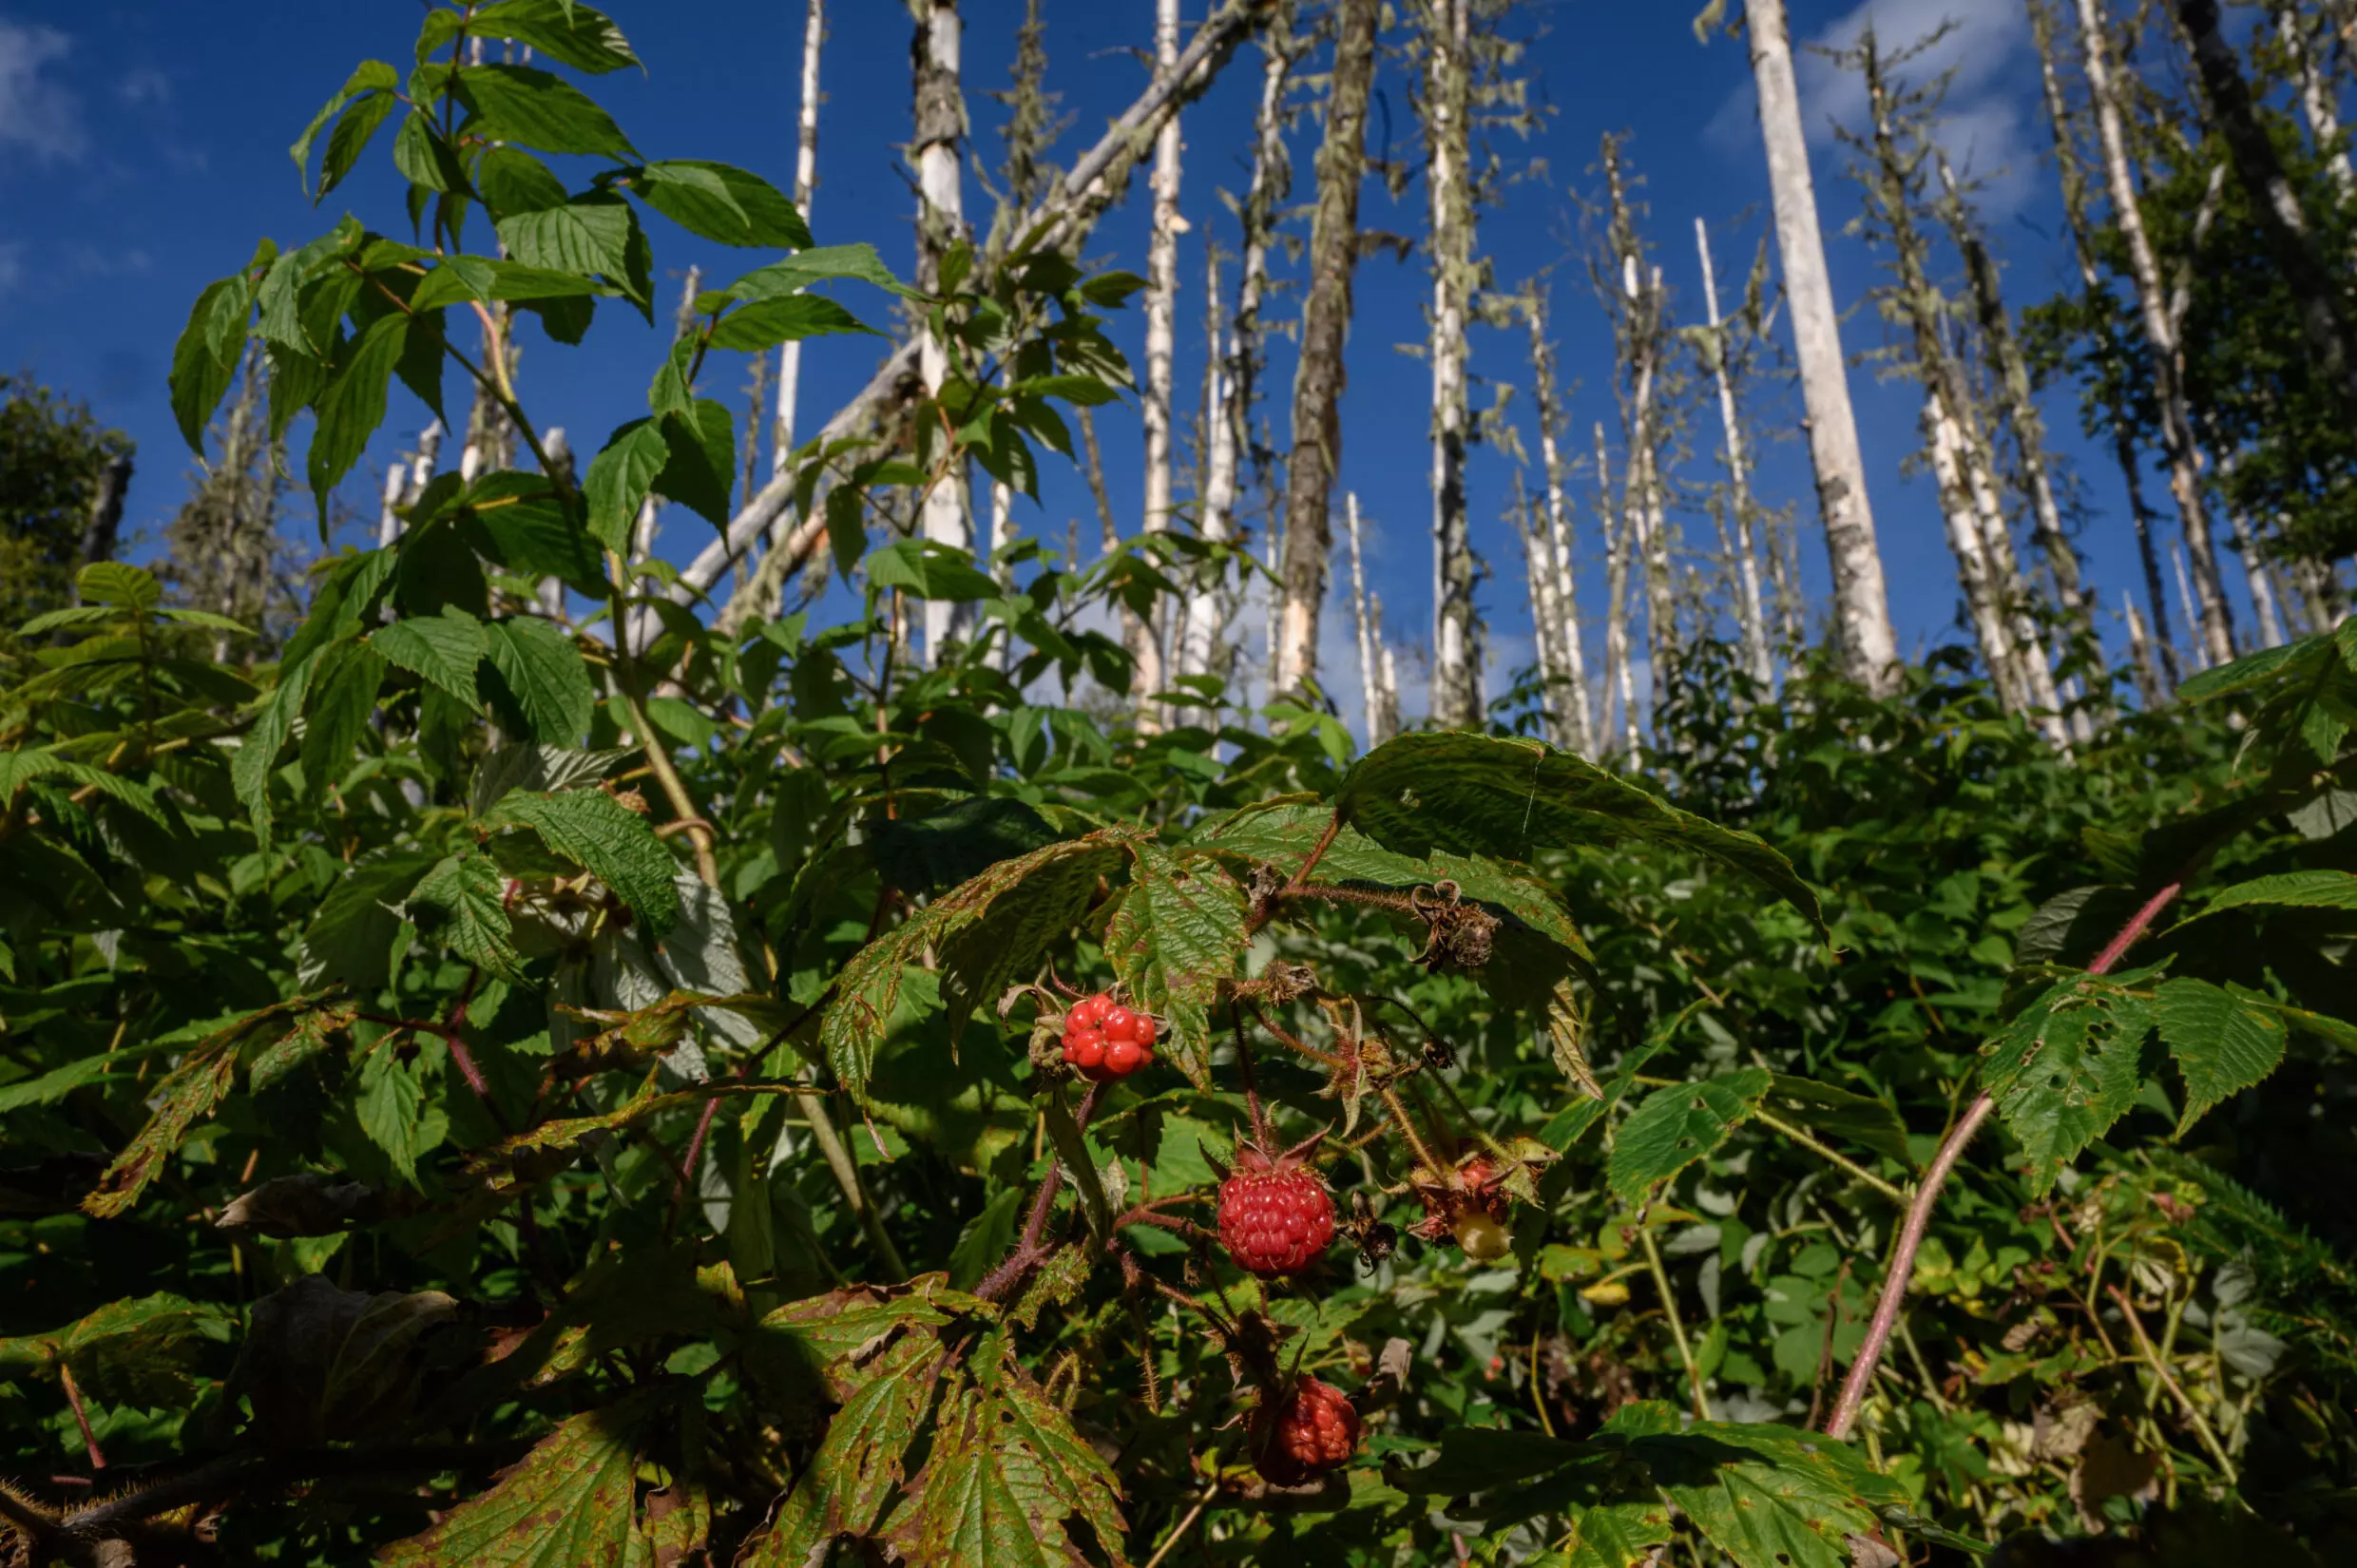 Raspberry bushes are seen before defoliated trees in an area of Canadian forest undergoing regeneration following a hemlock looper infestation. Photo: AFP